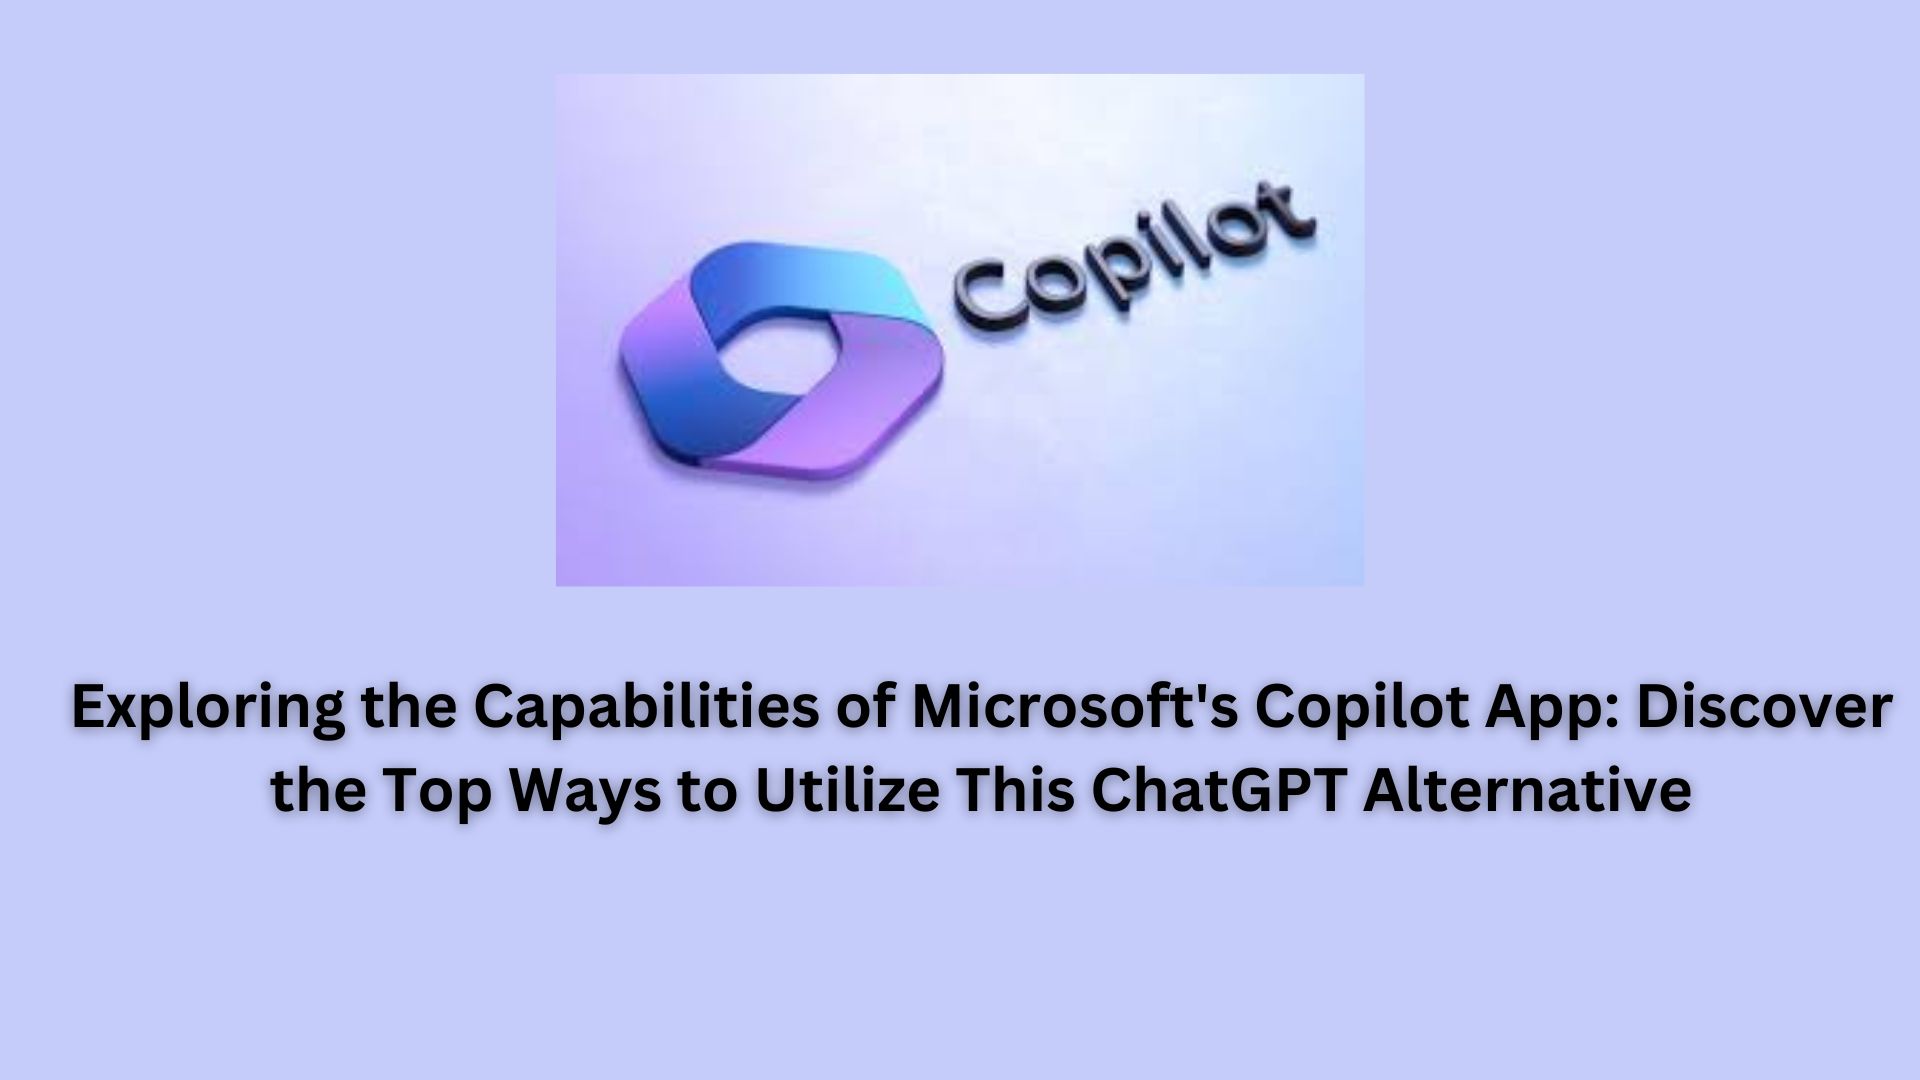 Exploring the Capabilities of Microsoft's Copilot App: Discover the Top Ways to Utilize This ChatGPT Alternative